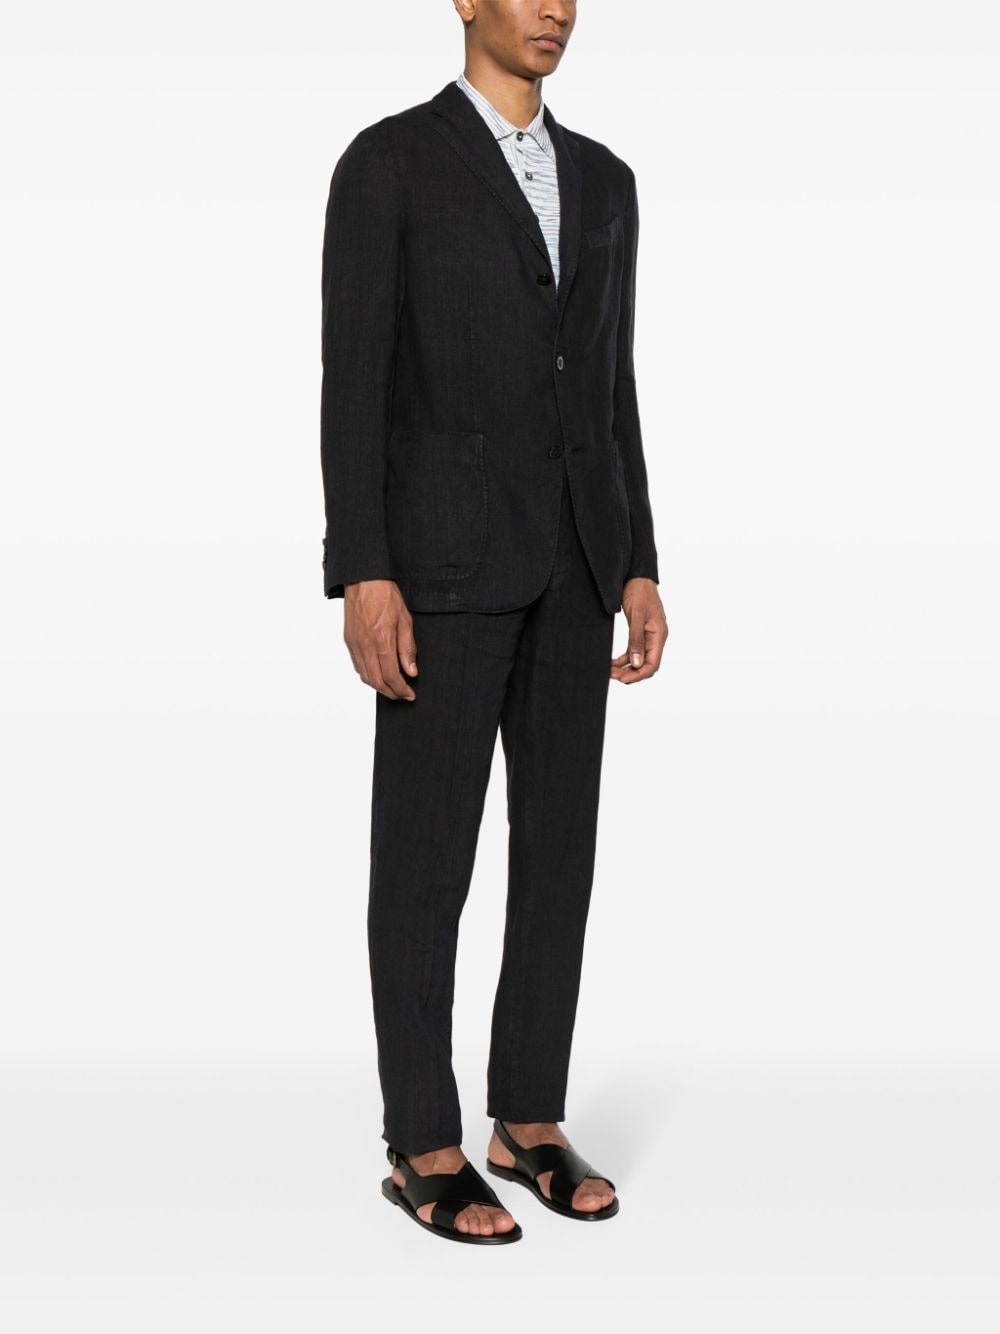 BOGLIOLI Midnight Blue Linen Single-Breasted Suit for Men - SS24 Collection